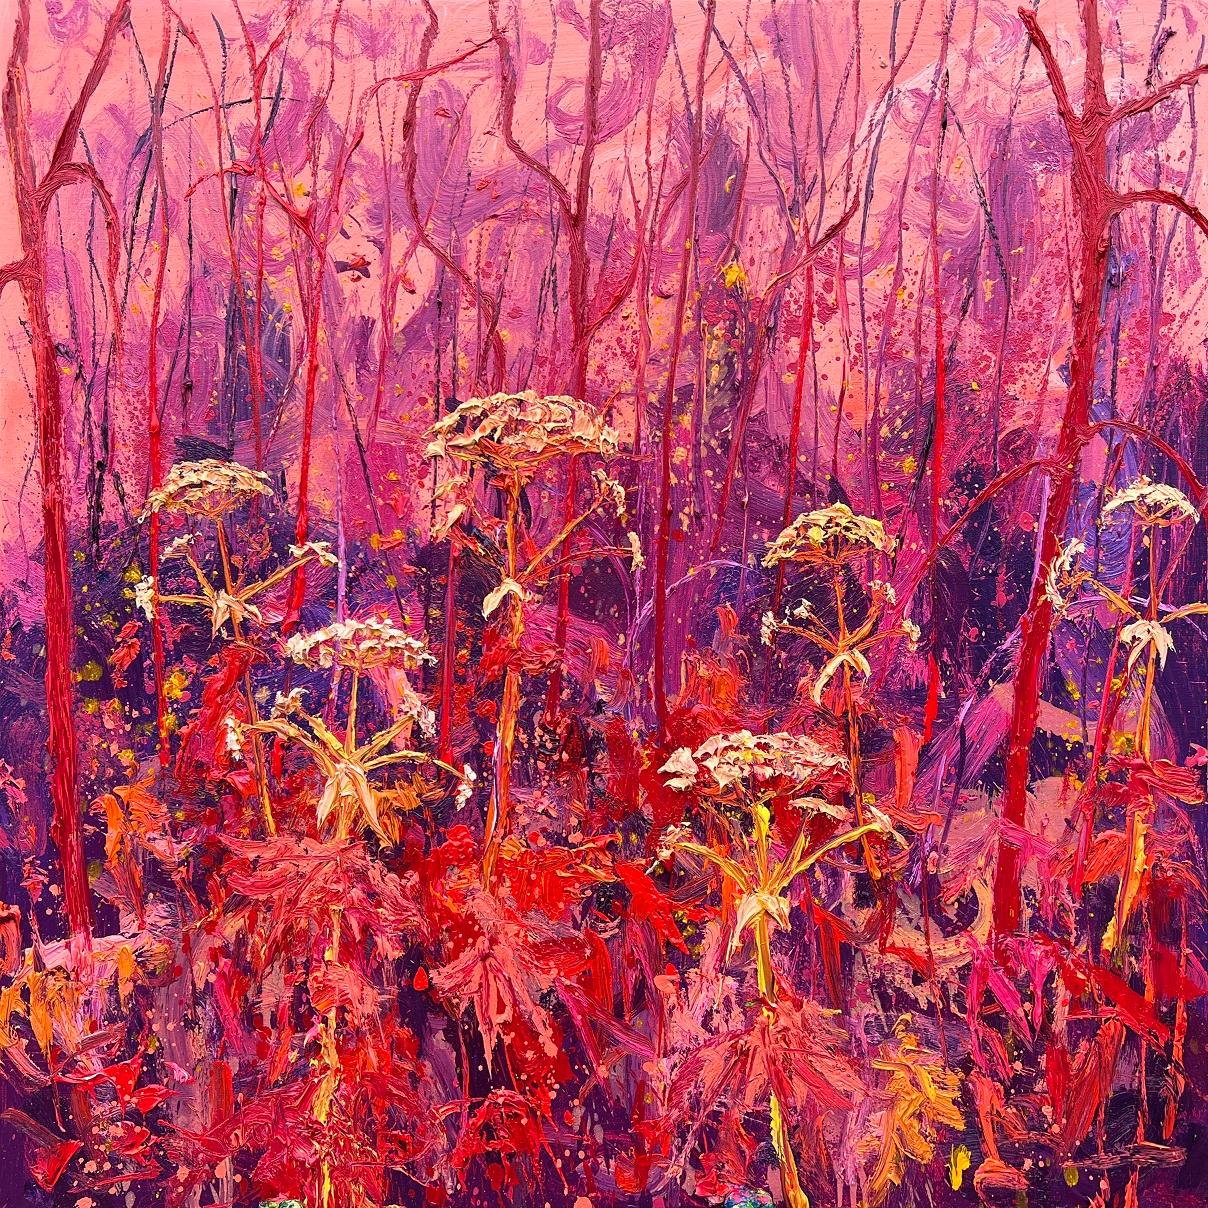 Gertjan Scholte-Albers Figurative Painting - Magenta Pig Hogweed Oil Painting on Canvas Outdoor Plein Air In Stock